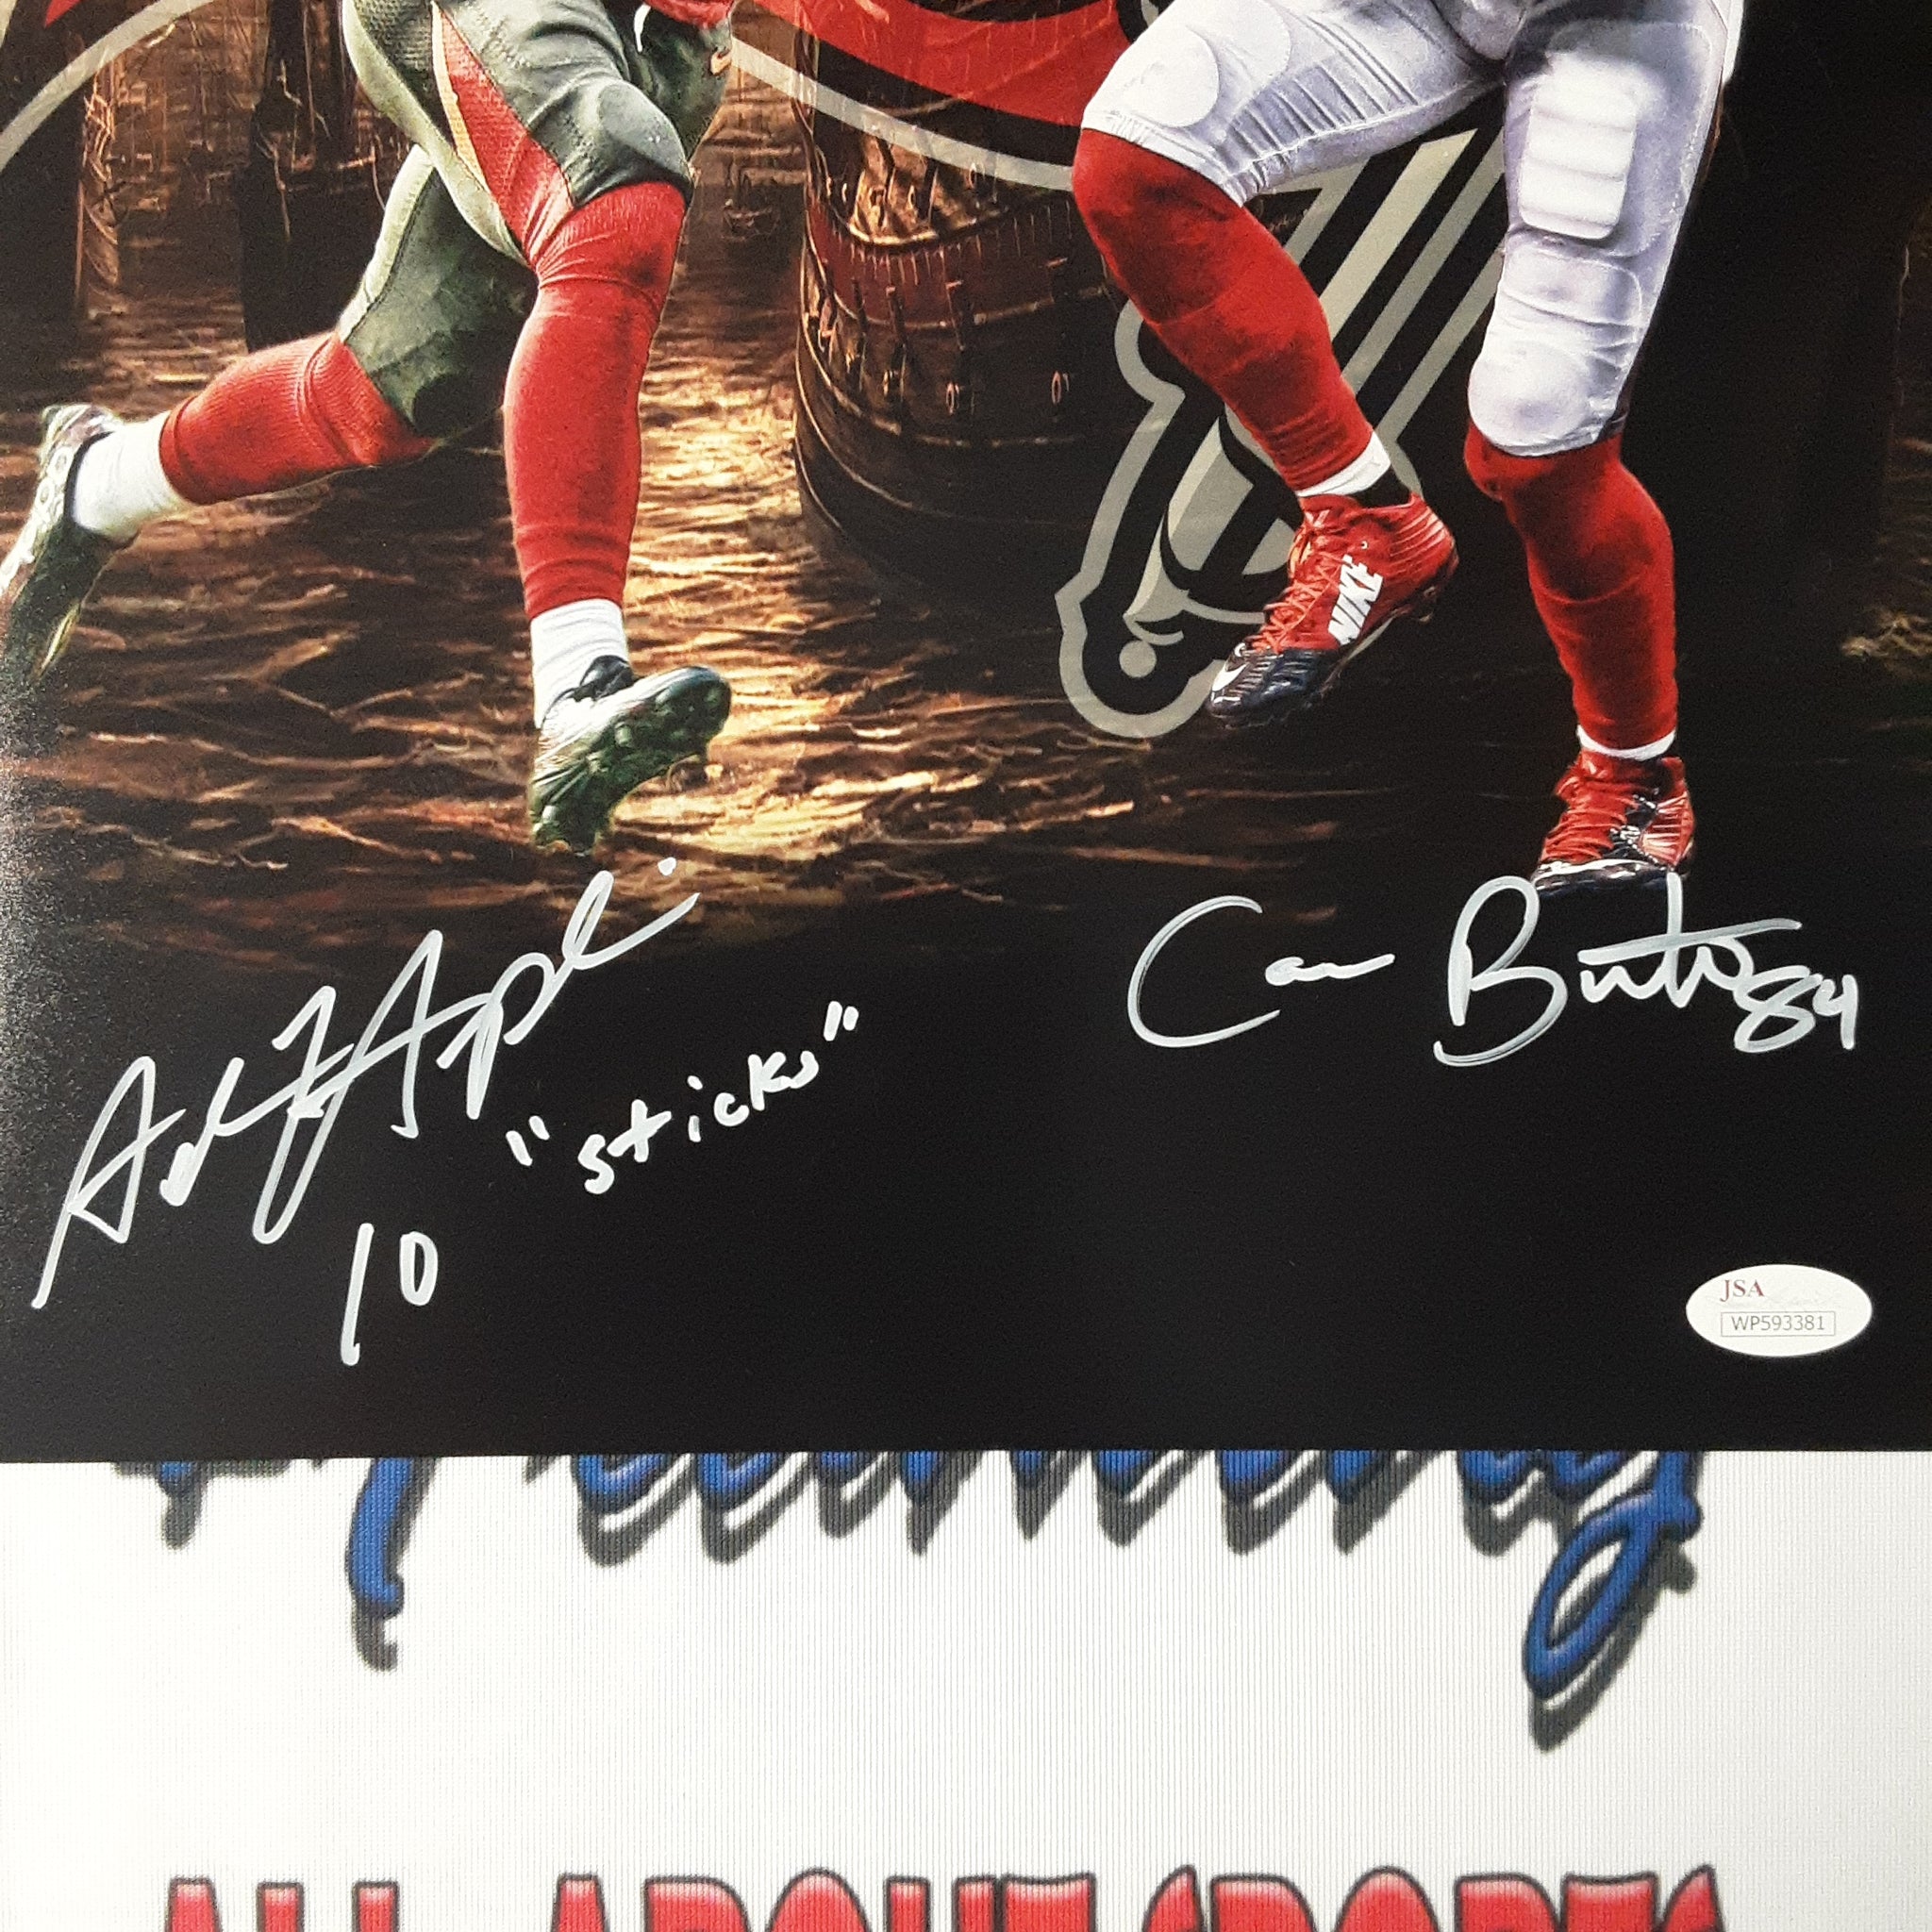 Cameron Brate and Adam Humphries Authentic Signed 11x14 Photo Autographed JSA.